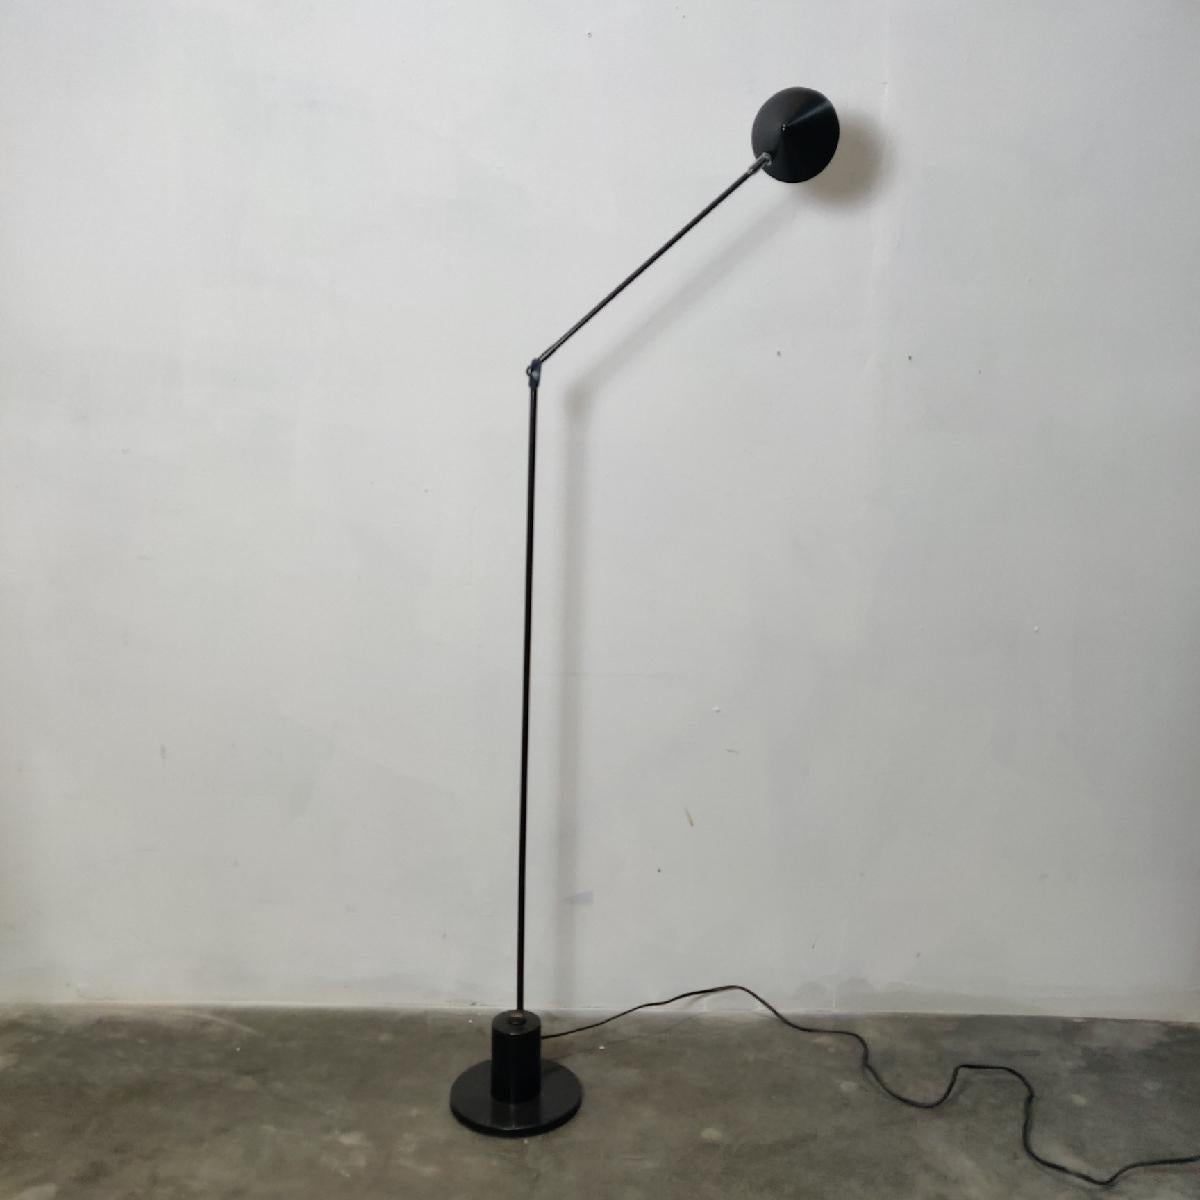 Belux modernist floor lamp, 80s. Minimalistic floor lamp with one upright and a conical halogen shade.
 
1st#210252.